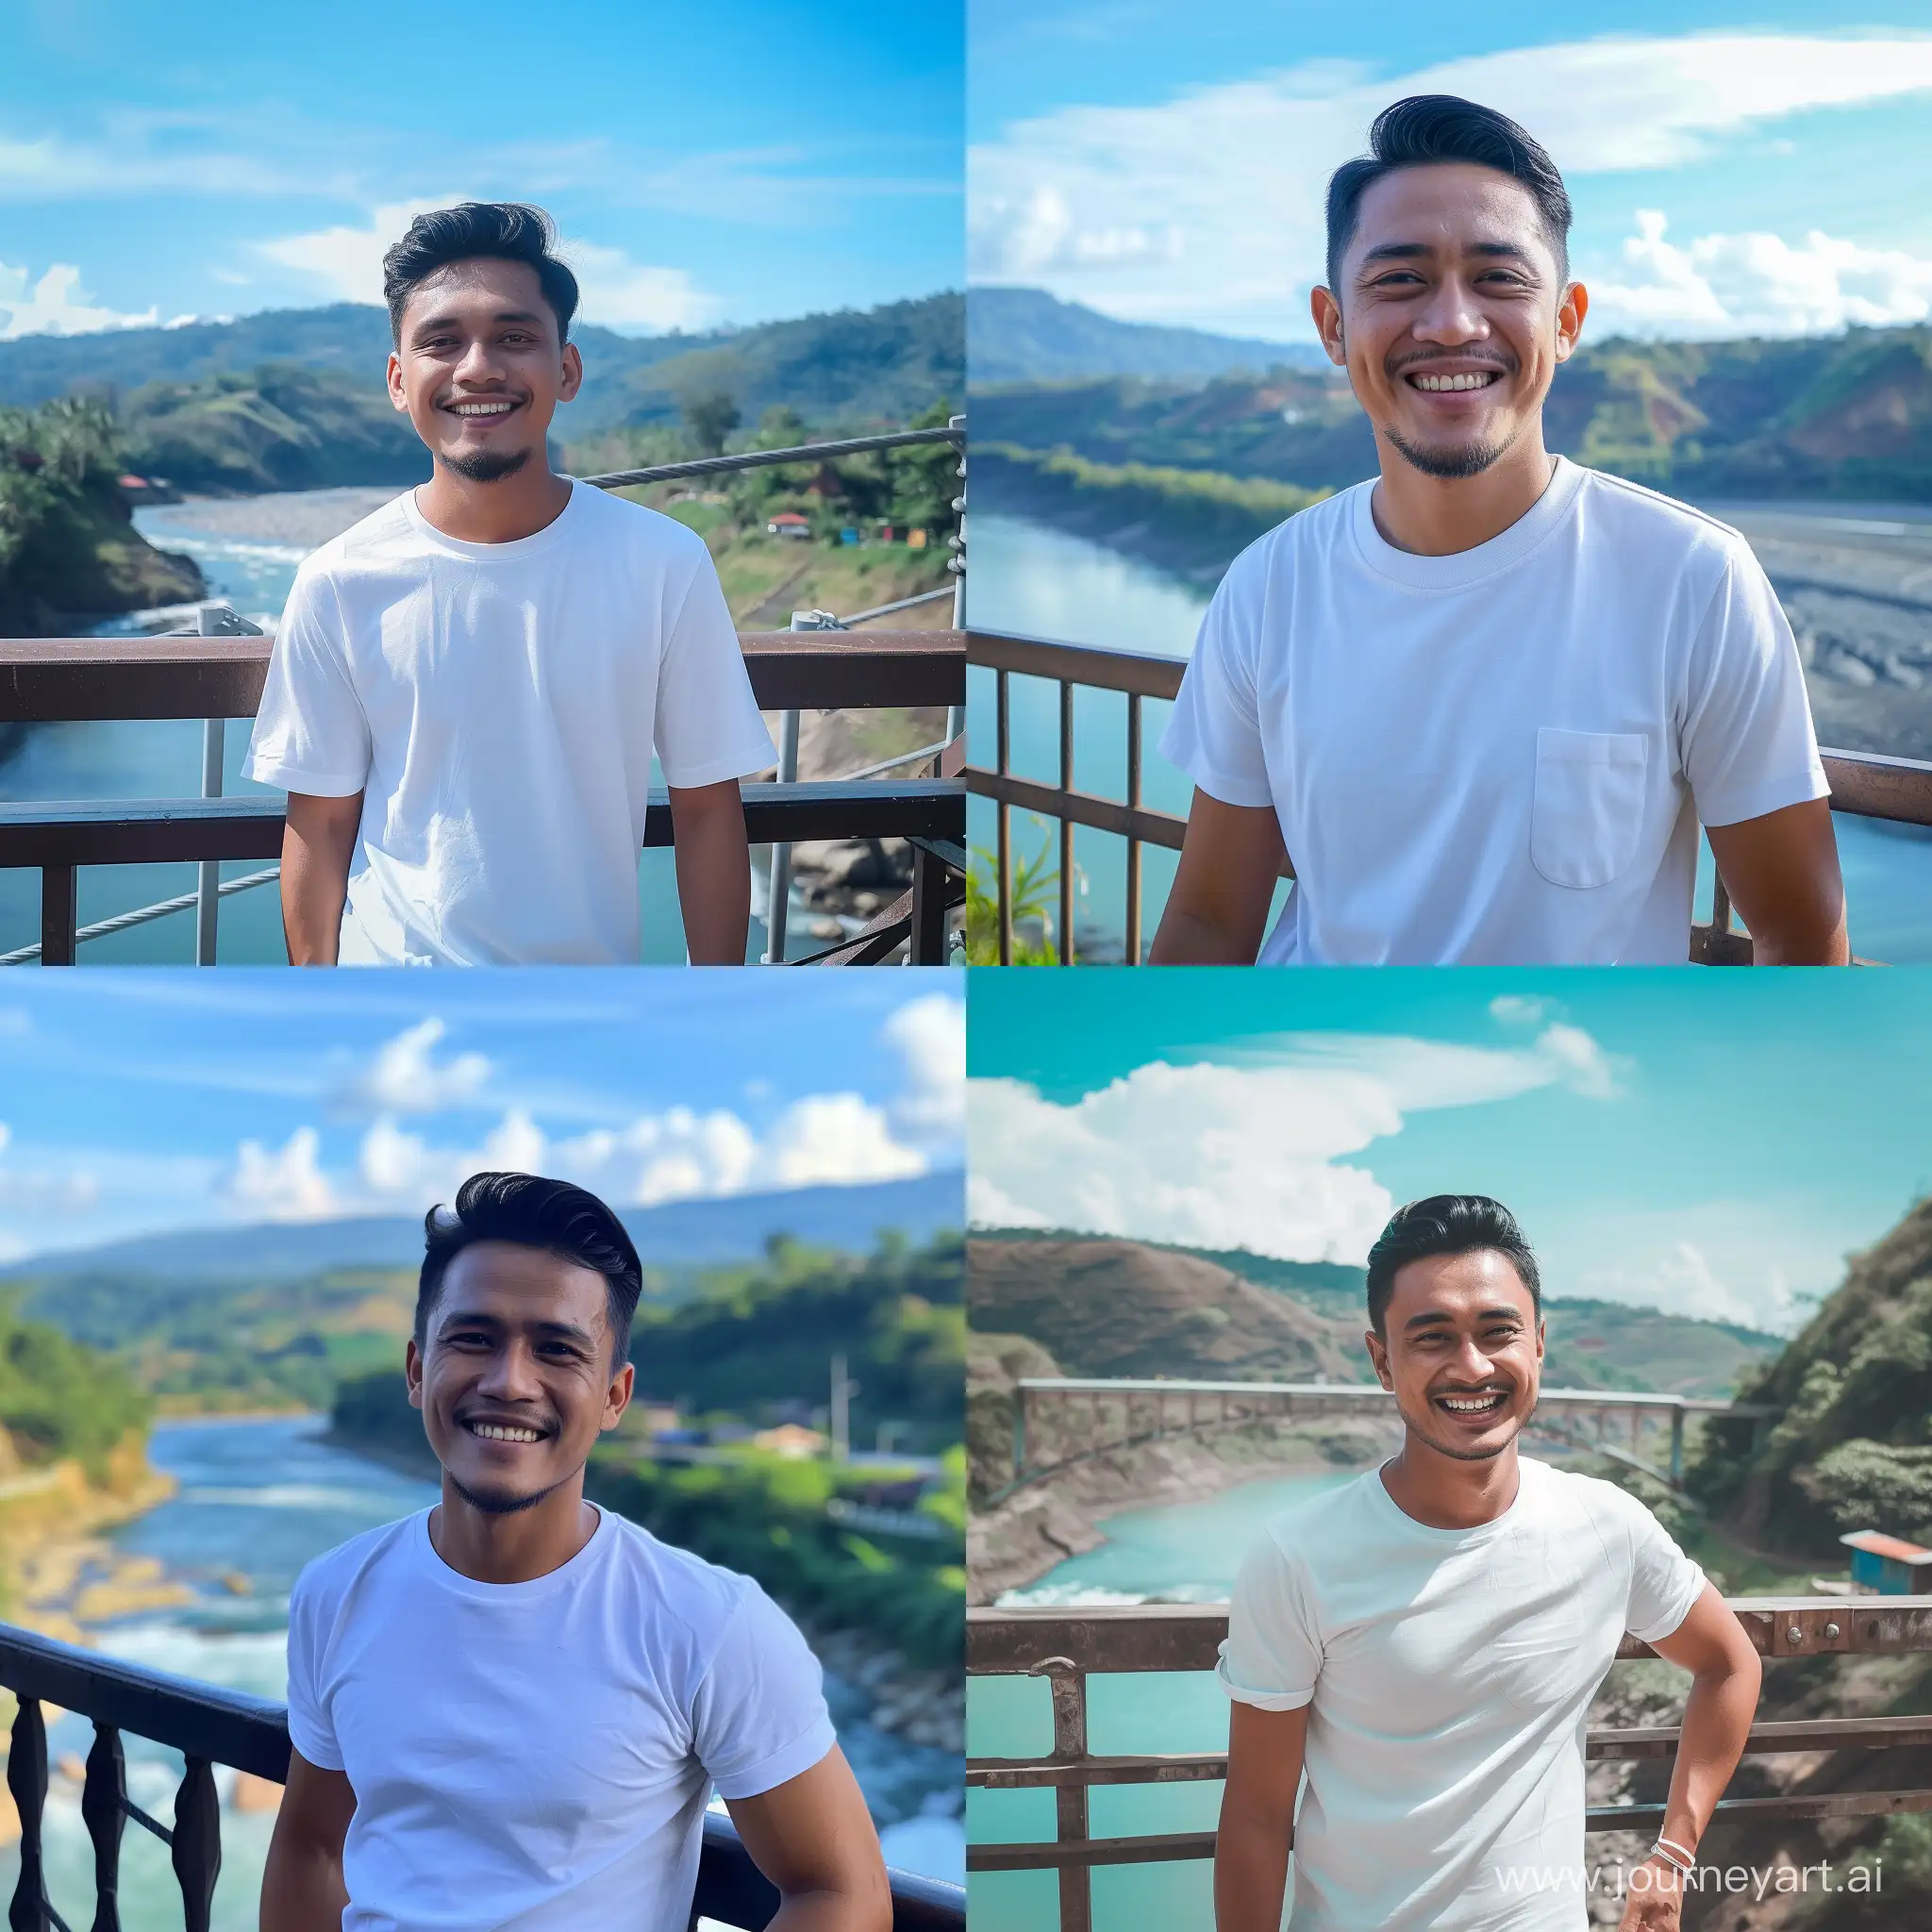 Smiling-Indonesian-Man-in-White-TShirt-on-Bridge-with-Scenic-River-and-Mountain-Background